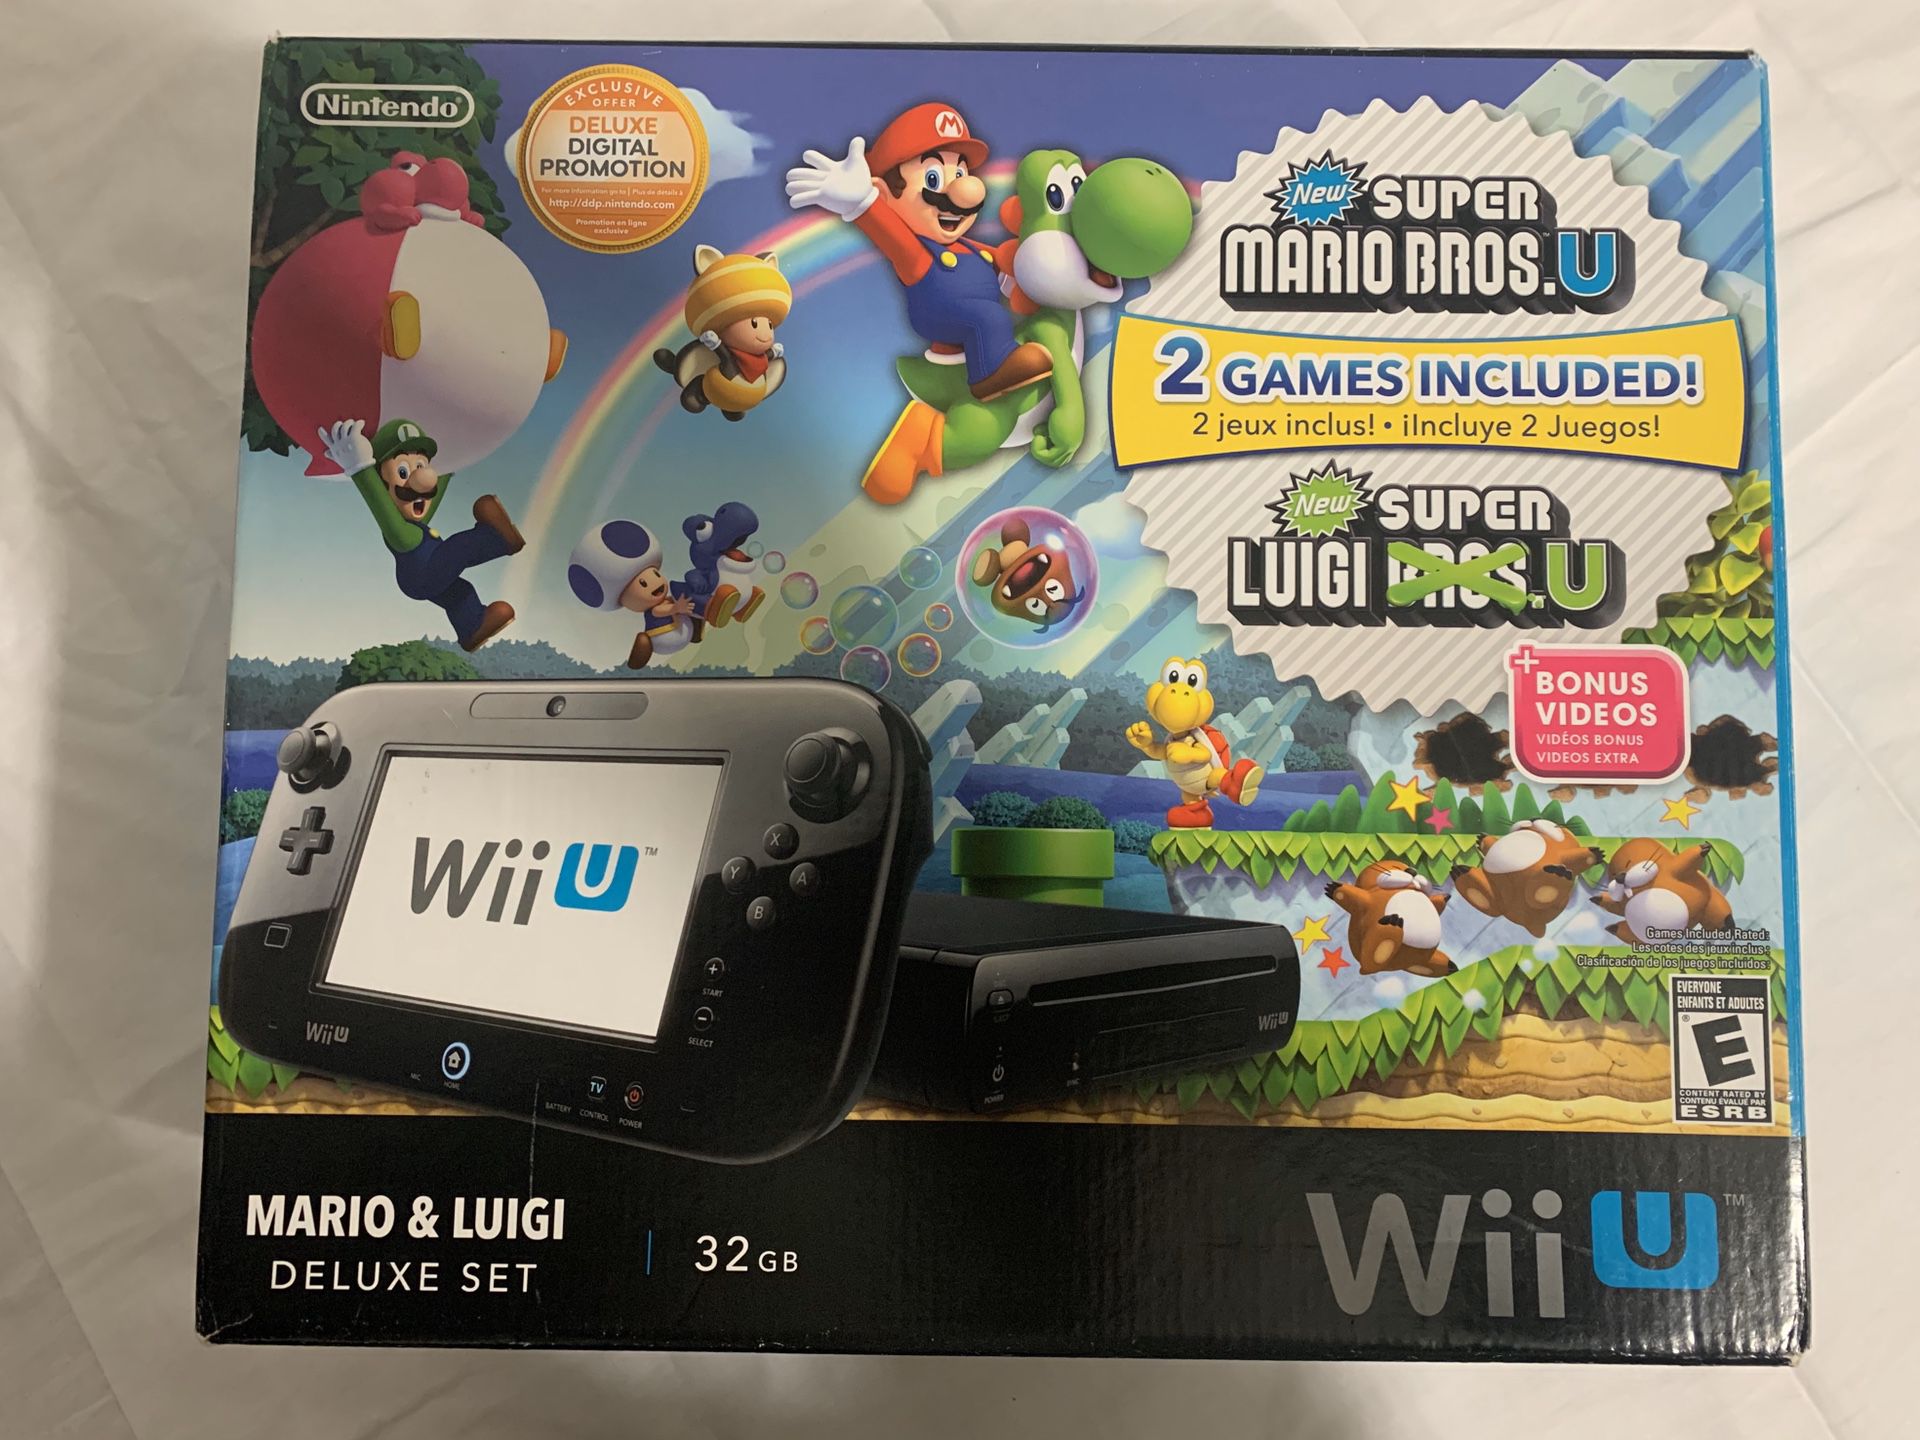 Nintendo Wii U that includes 25 games and 4 Wii remotes